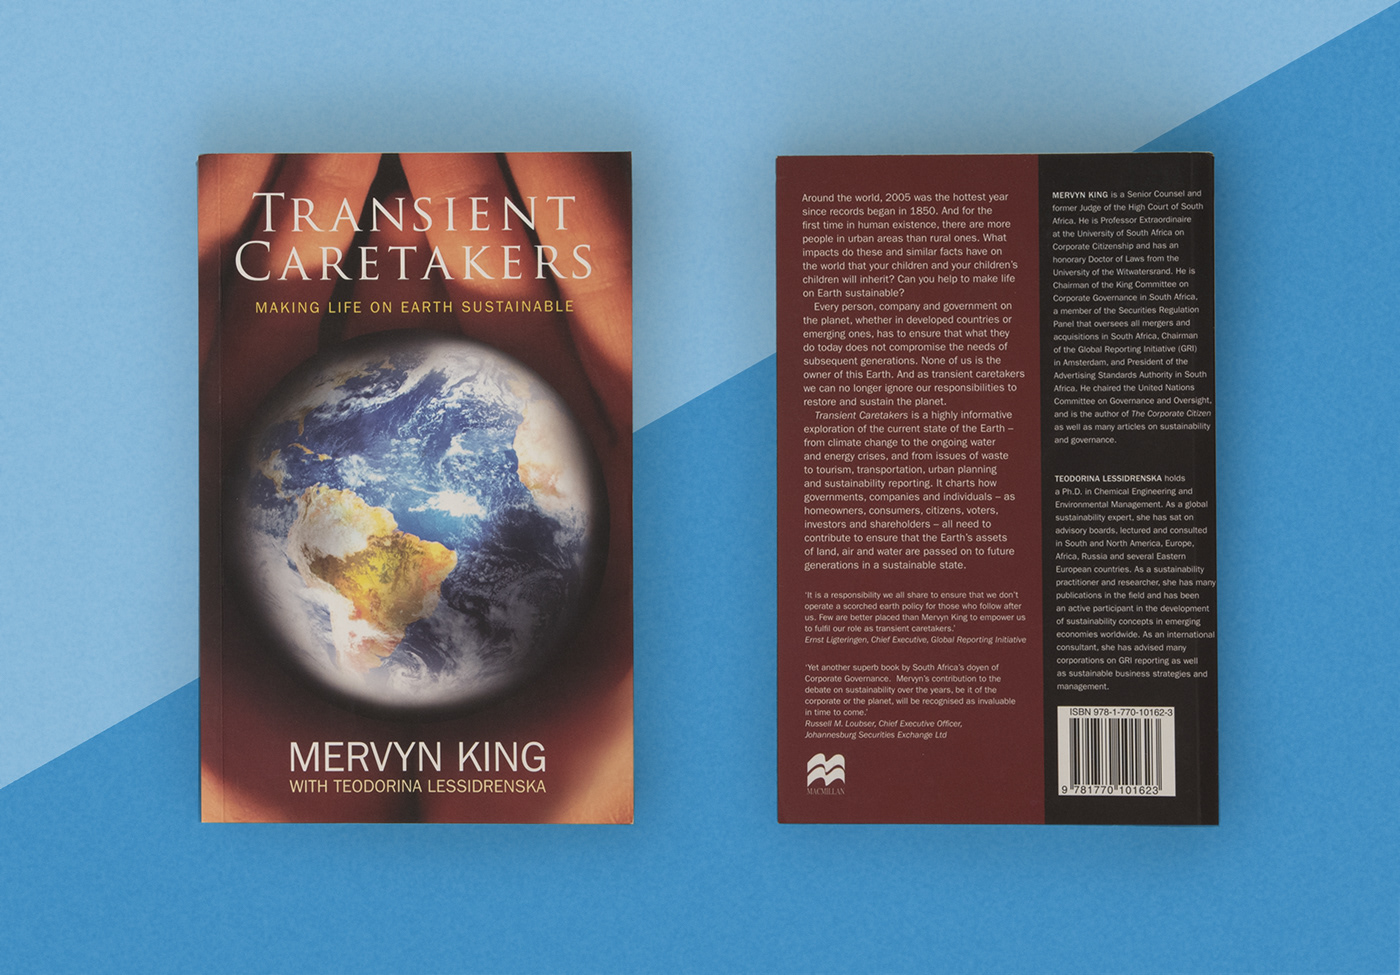 Book cover design for Transient Caretakers by Mervyn King